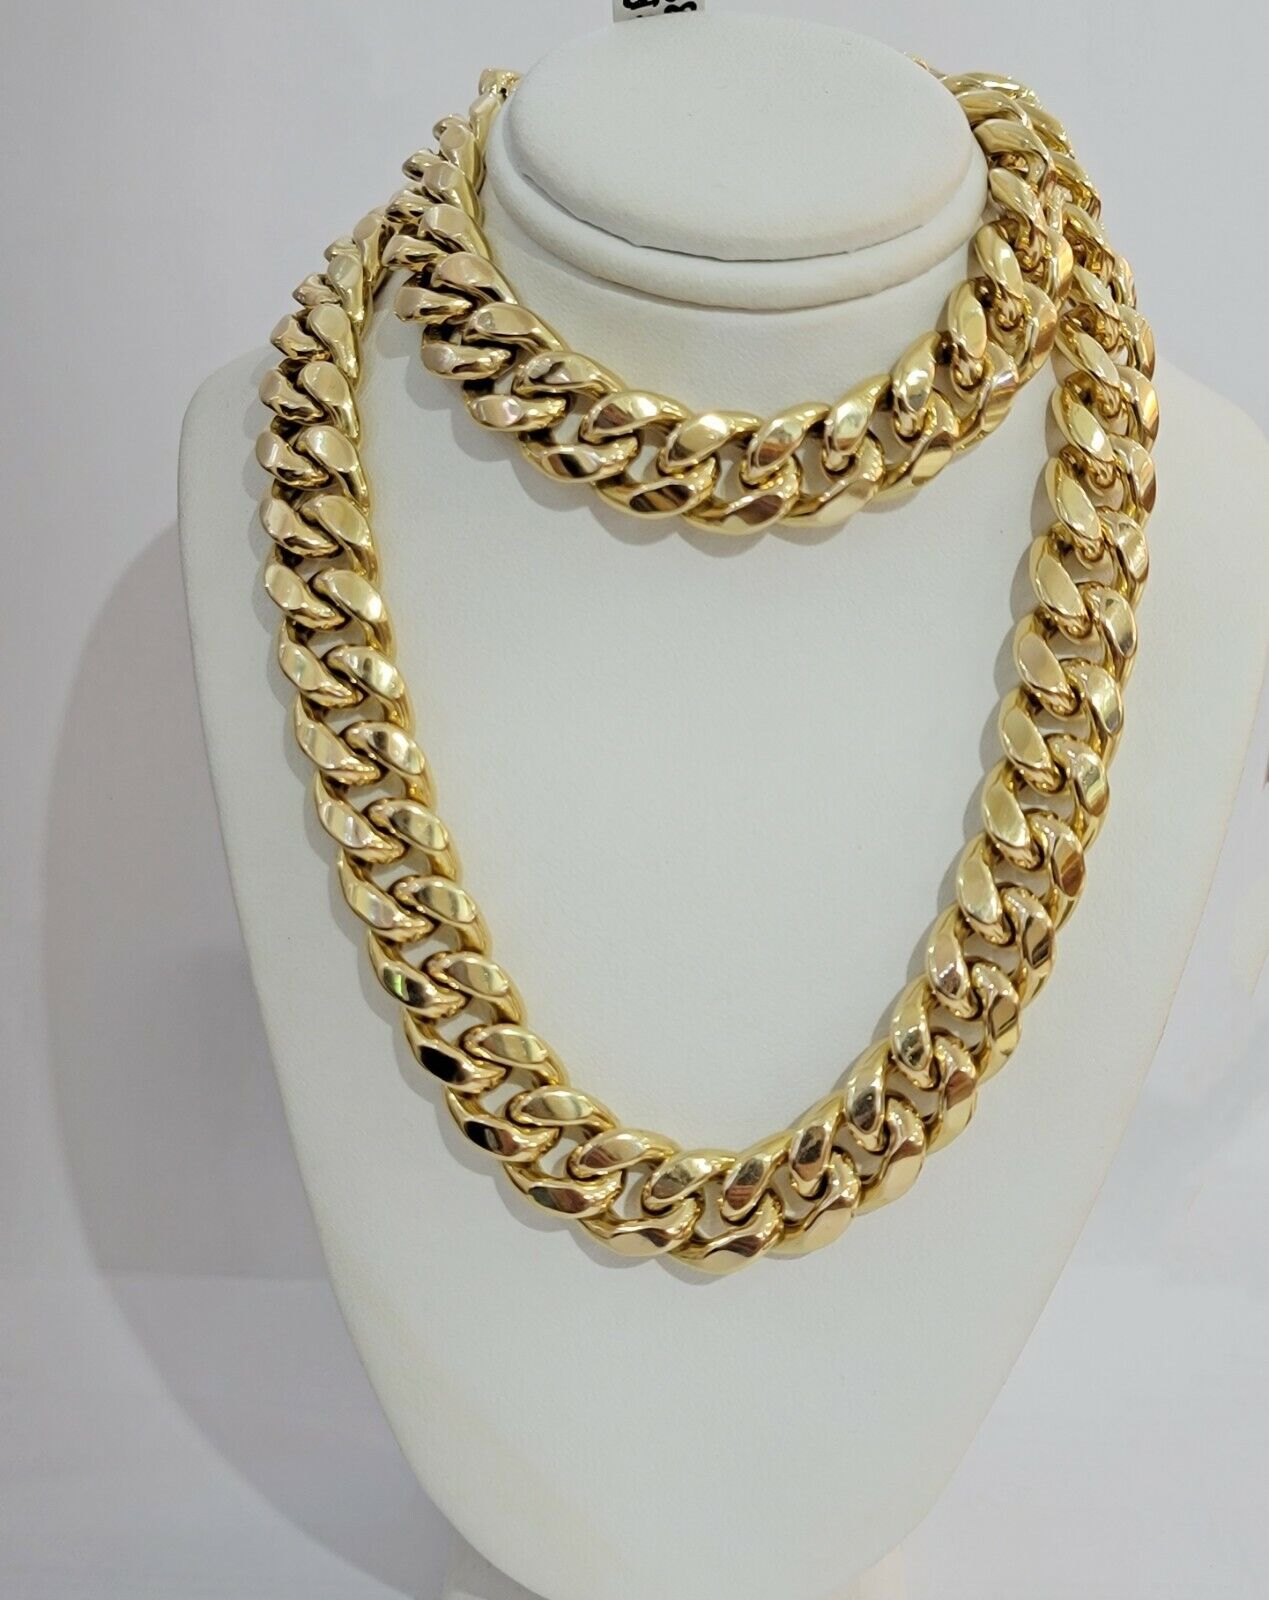 15mm Miami Cuban Link Chain Necklace 10k Yellow Gold 22-30 Inch Mens SOLID 10kt